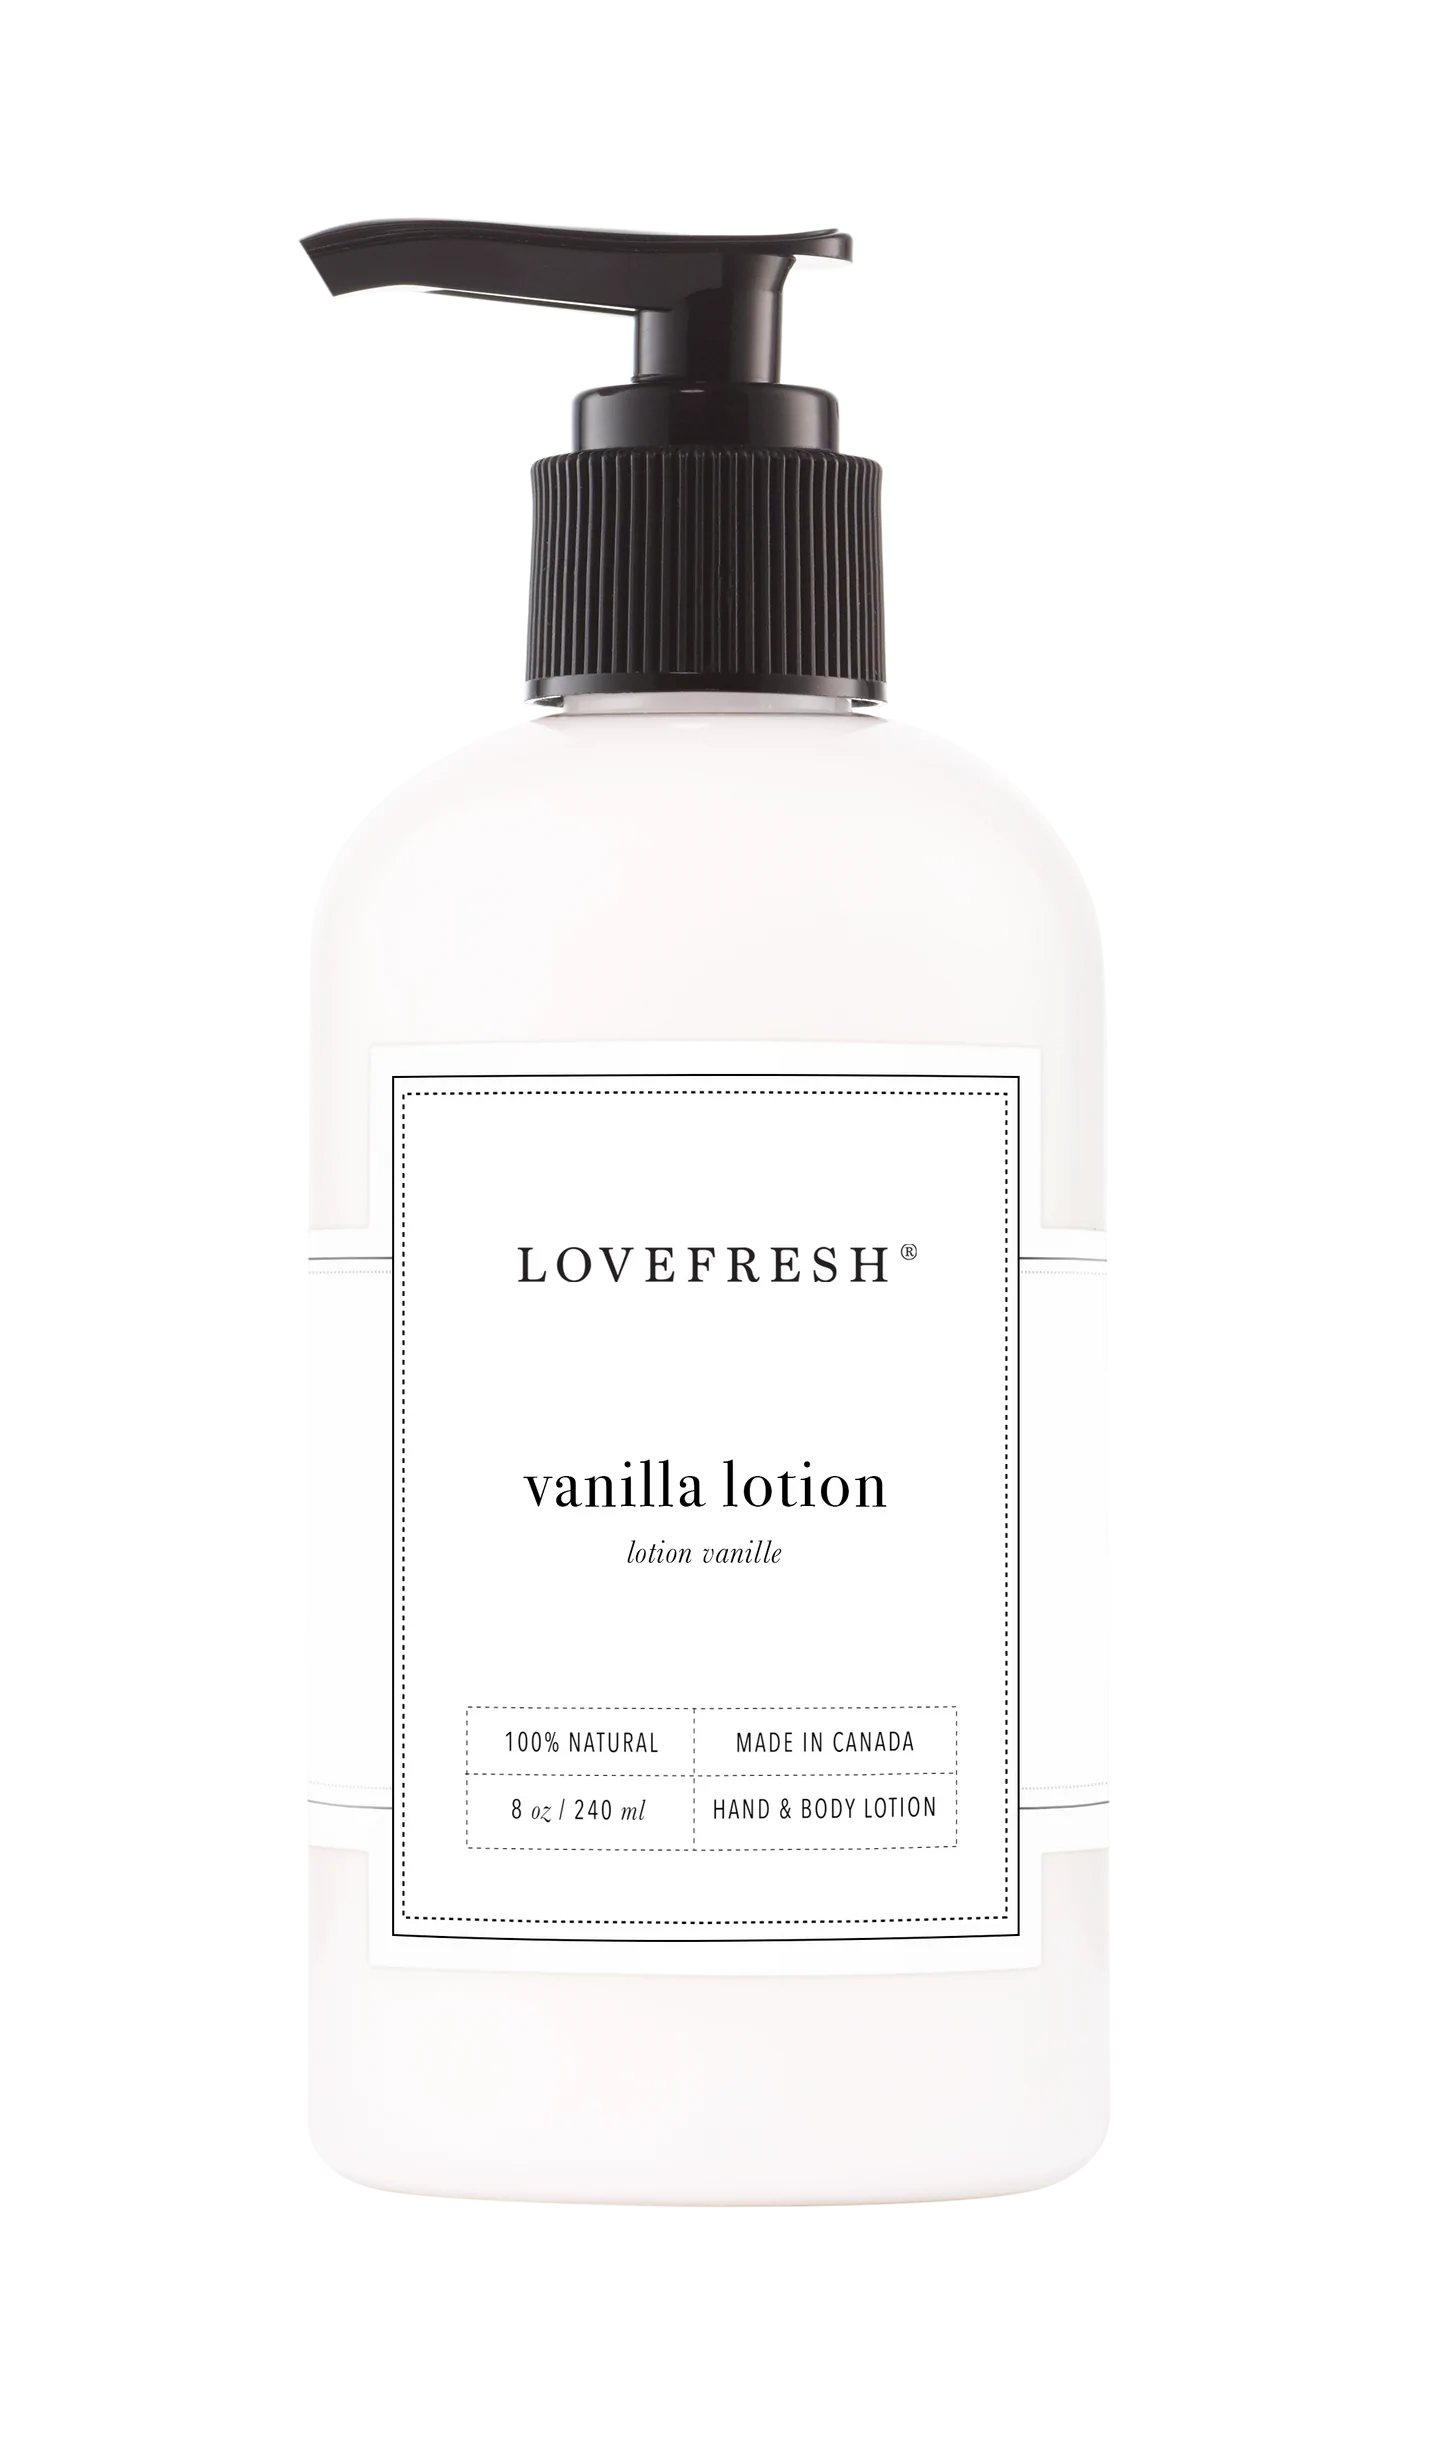 Lovefresh Hand & Body Lotion